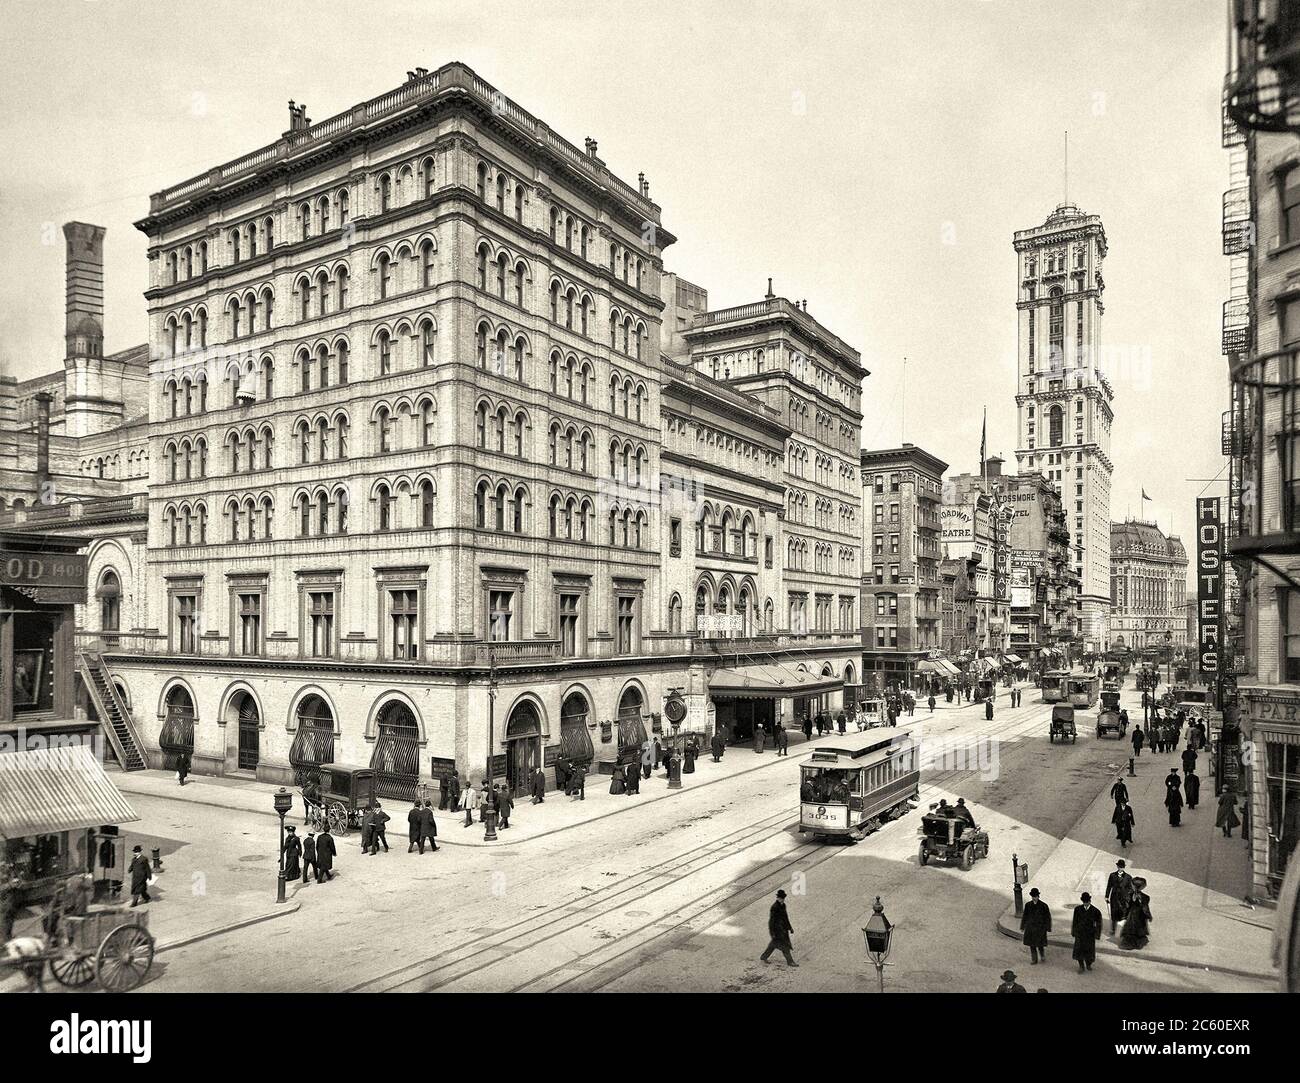 New York, 1905. 'Metropolitan Opera House, 39th Street and Broadway.' And down the street, the new New York Times building. Stock Photo